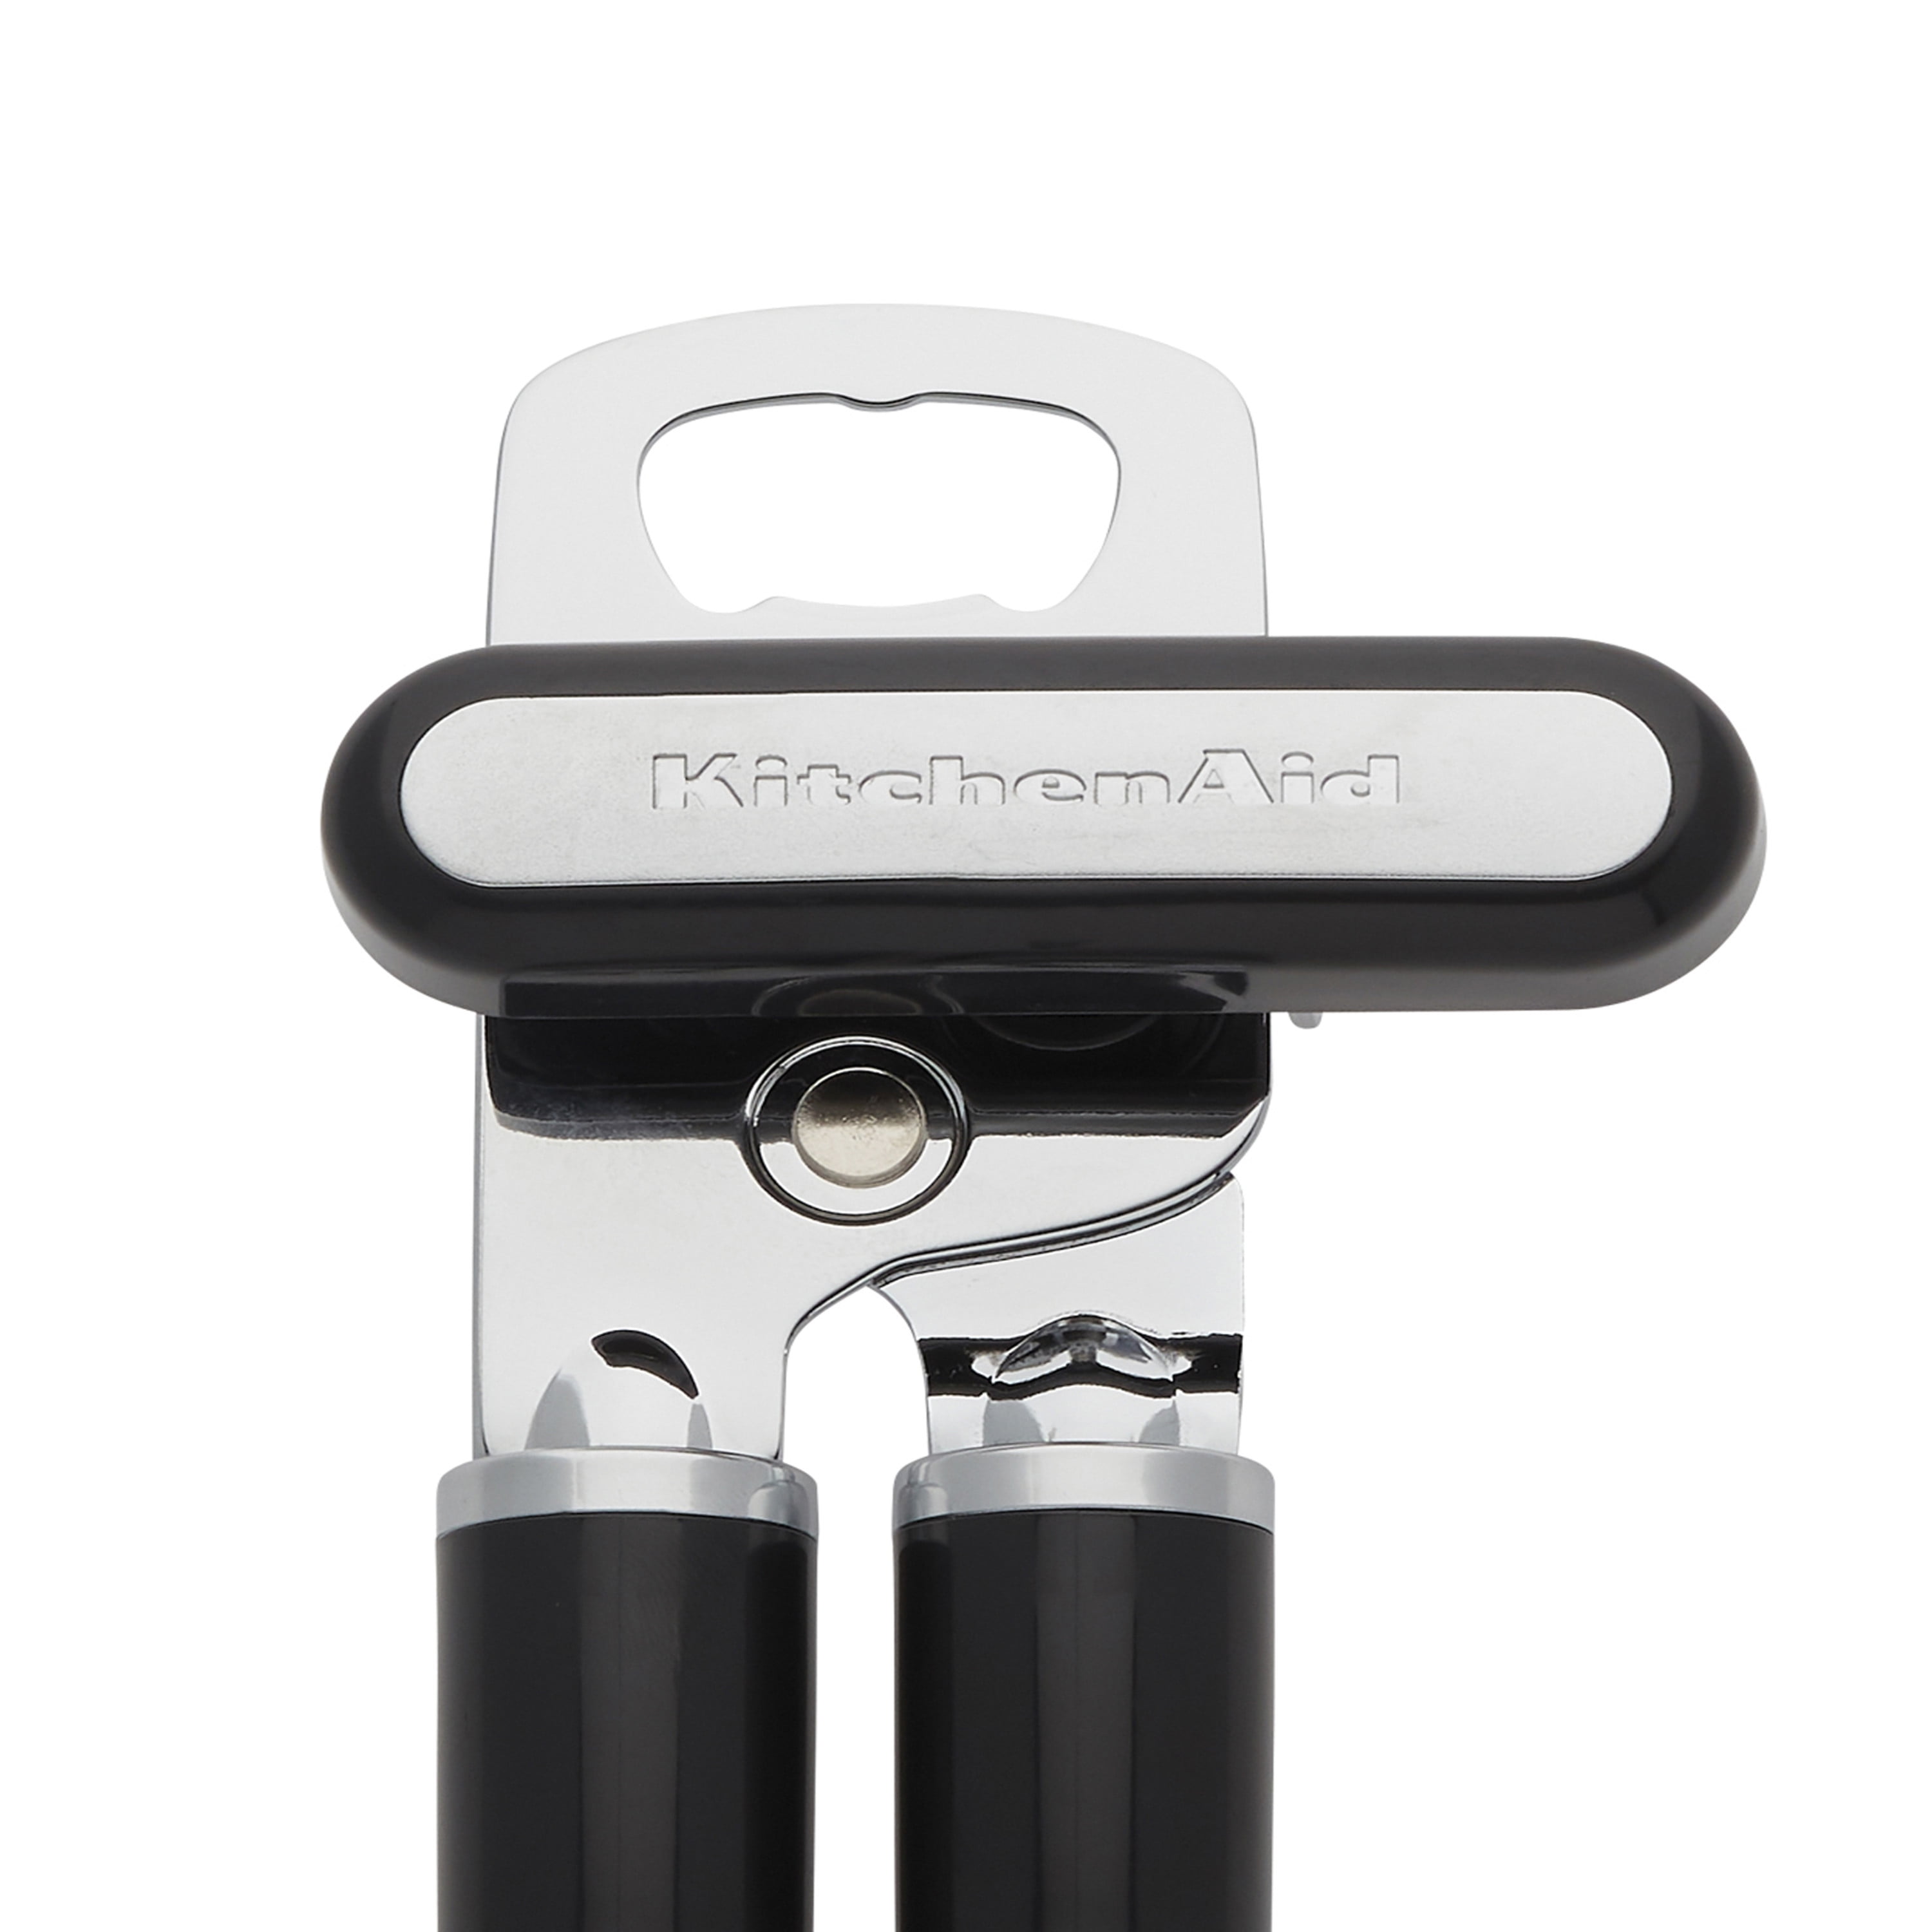 KitchenAid Can Opener, Black reviews in Small Kitchen Appliances